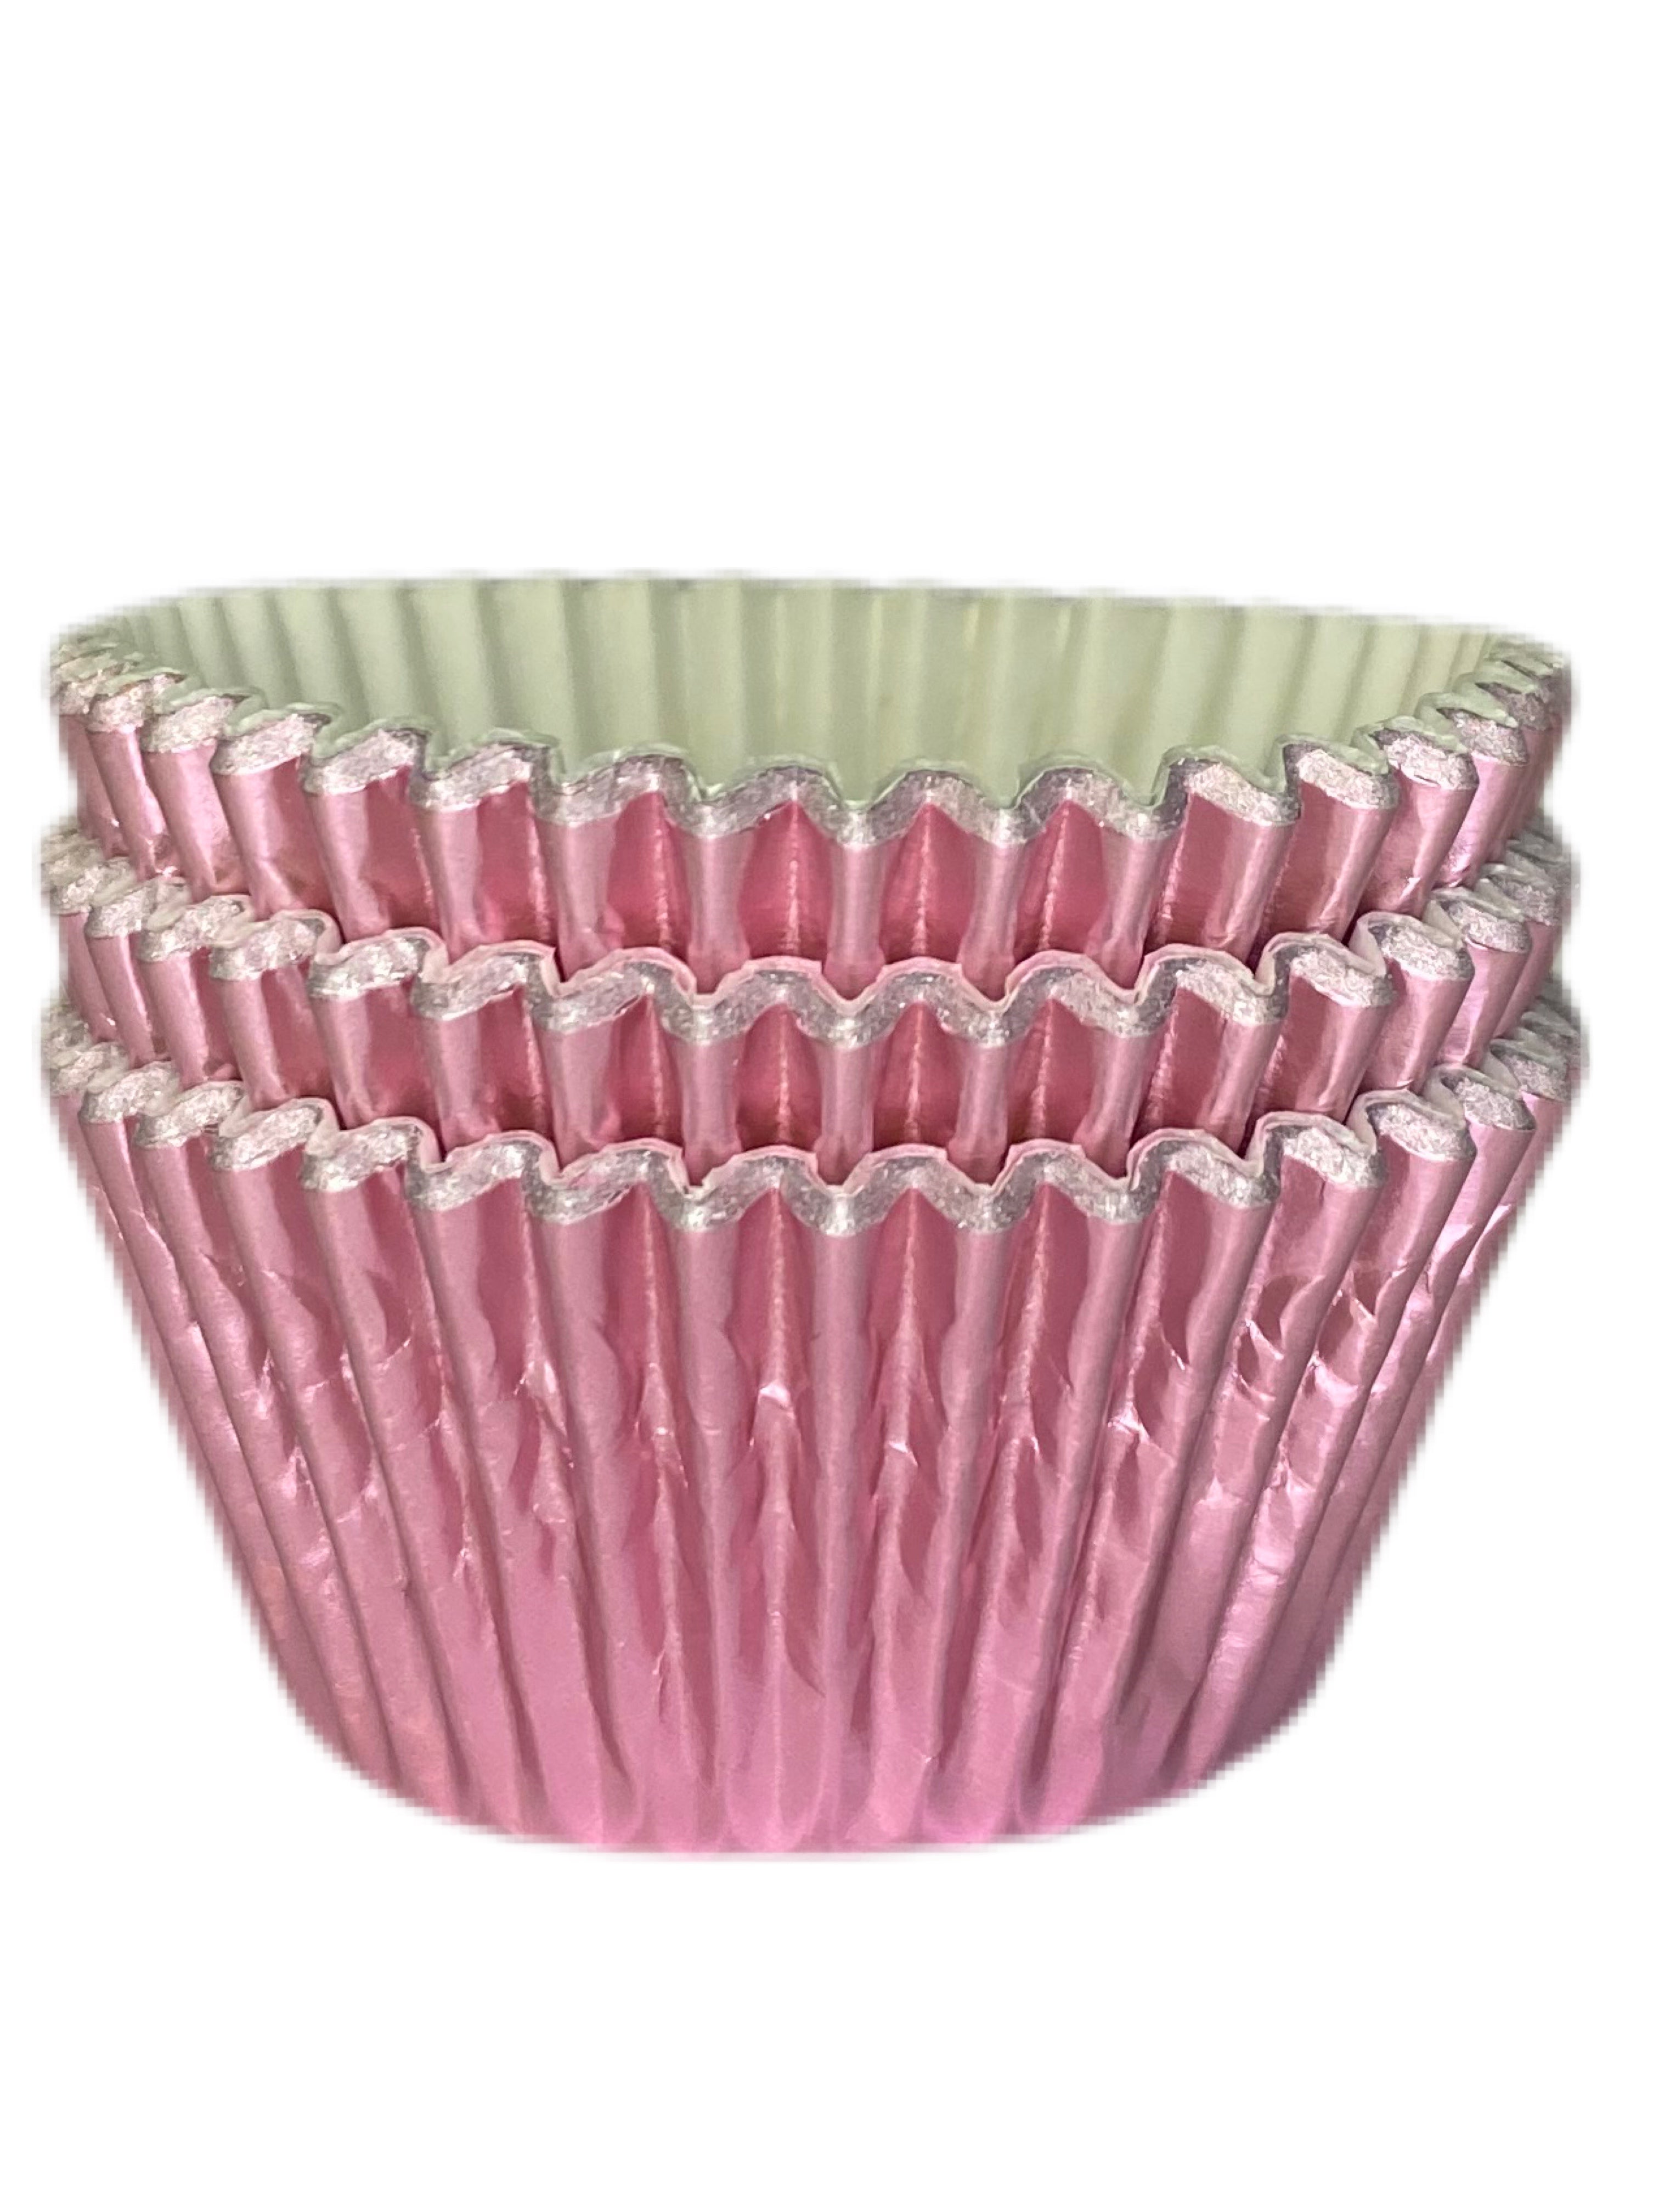 Pale Pink Foil Cupcake / Muffin Baking Cases Pack of Approx 36 Kate's Cupboard newbridge